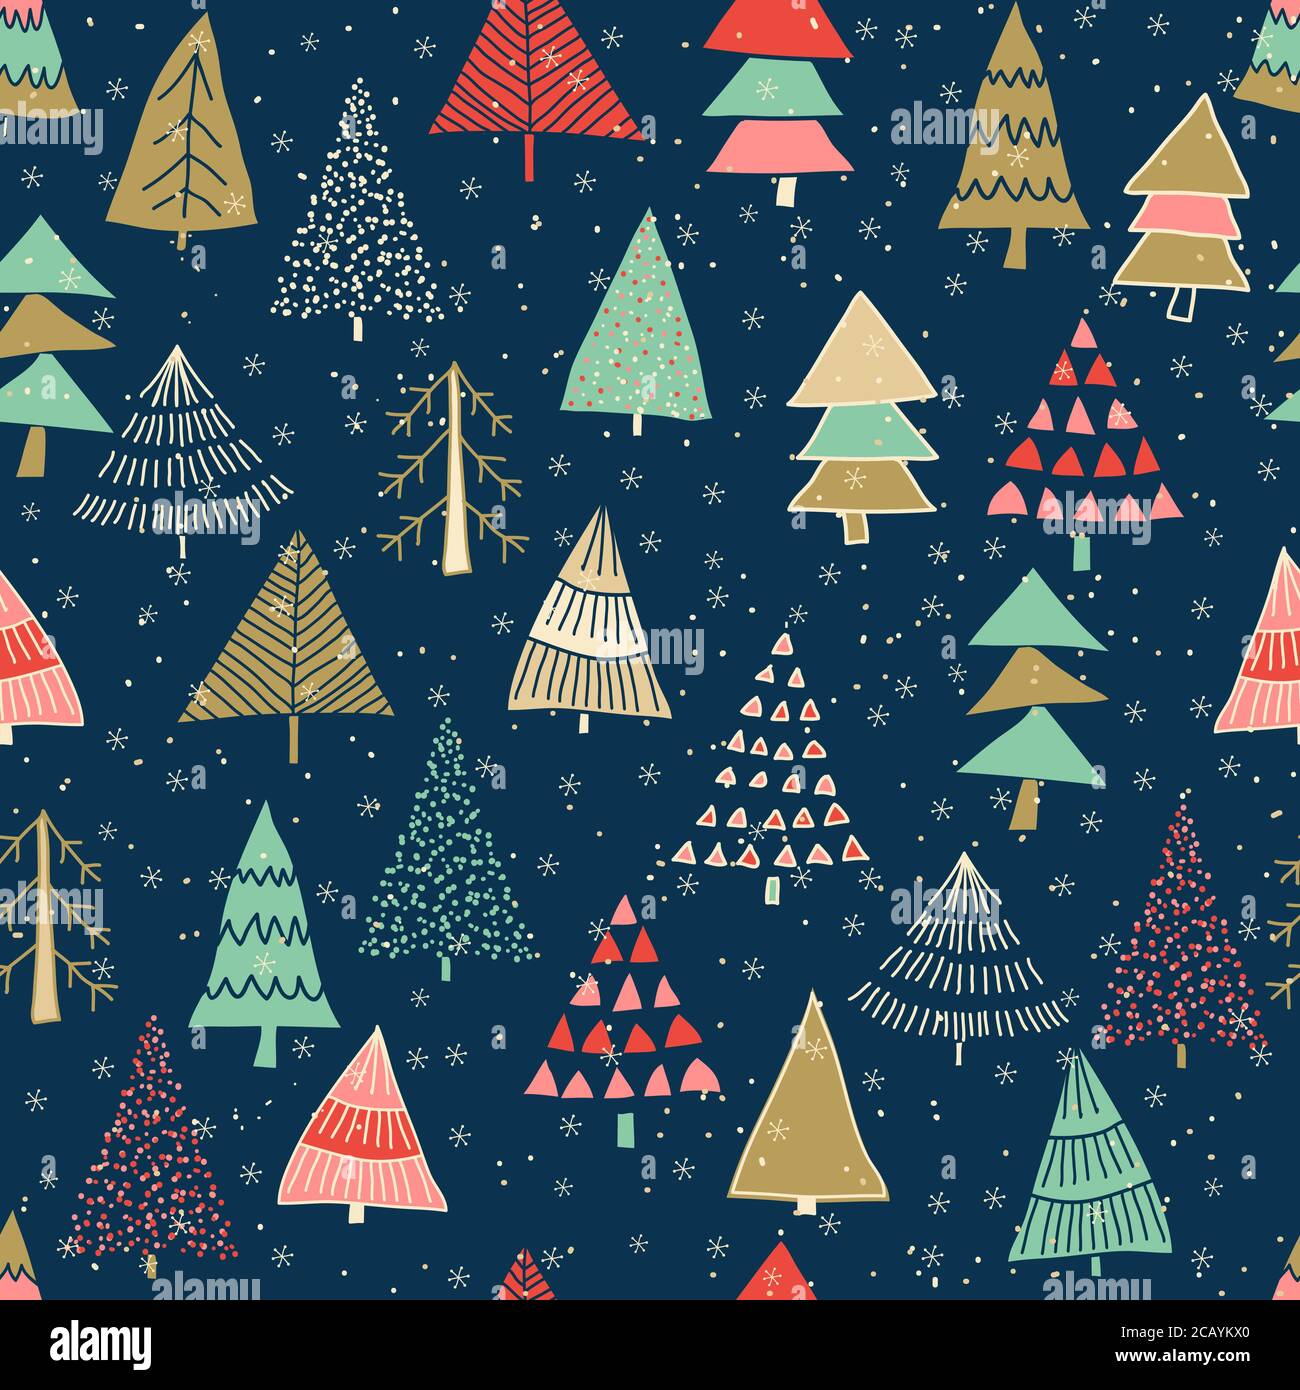 Christmas seamless pattern for greeting cards, wrapping papers. Hand drawn Vector illustration. Stock Vector